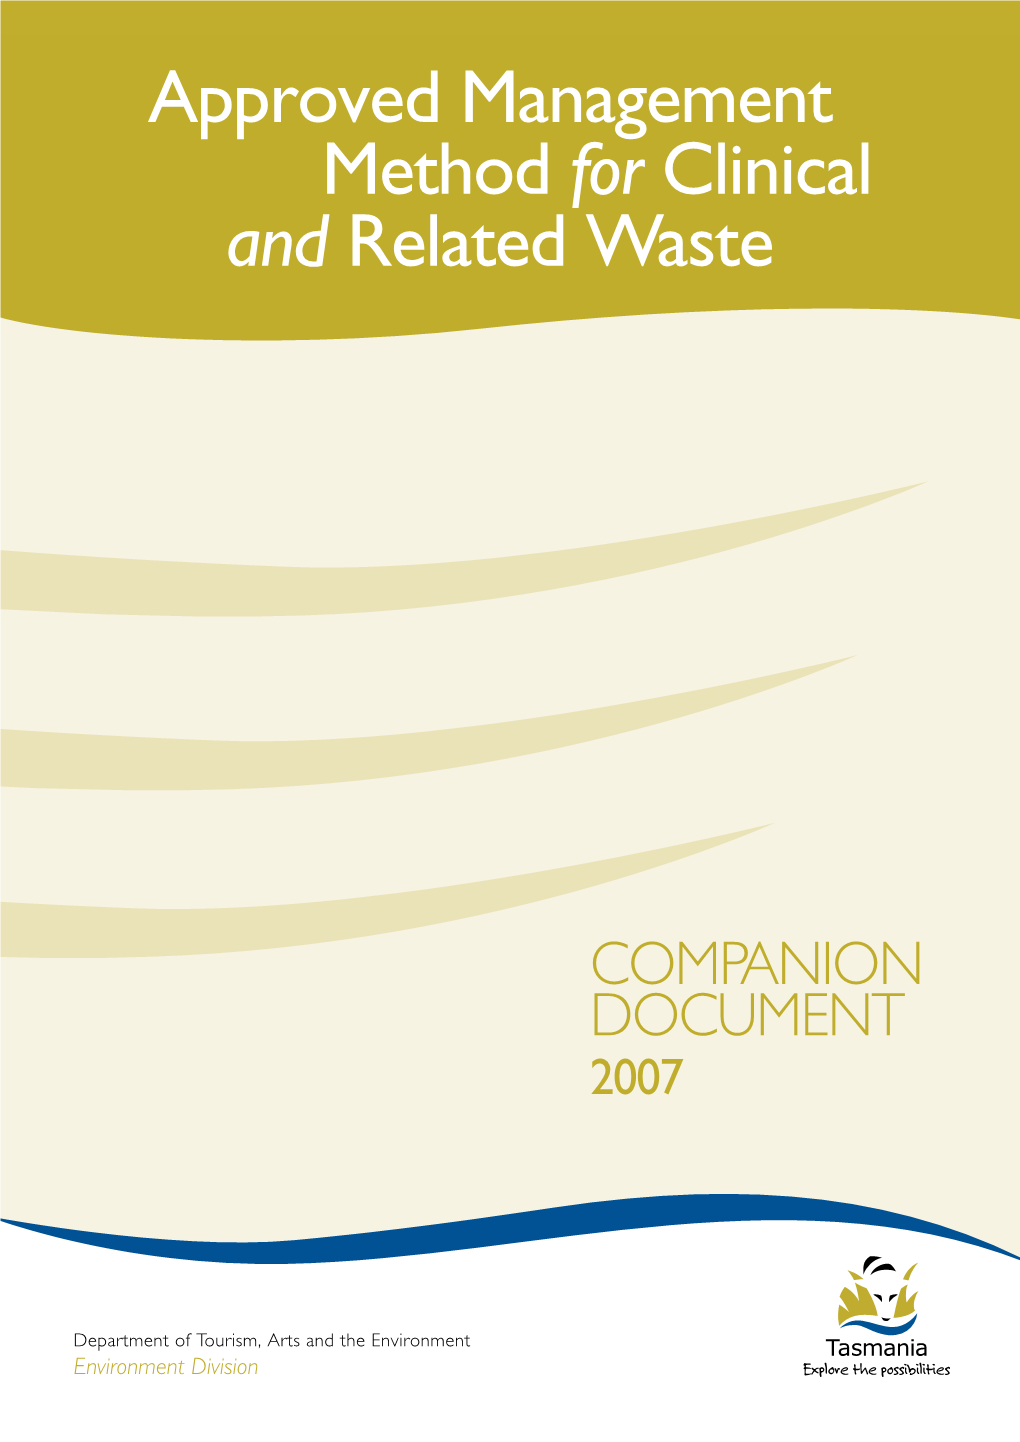 Approved Management Method for Clinical and Related Waste